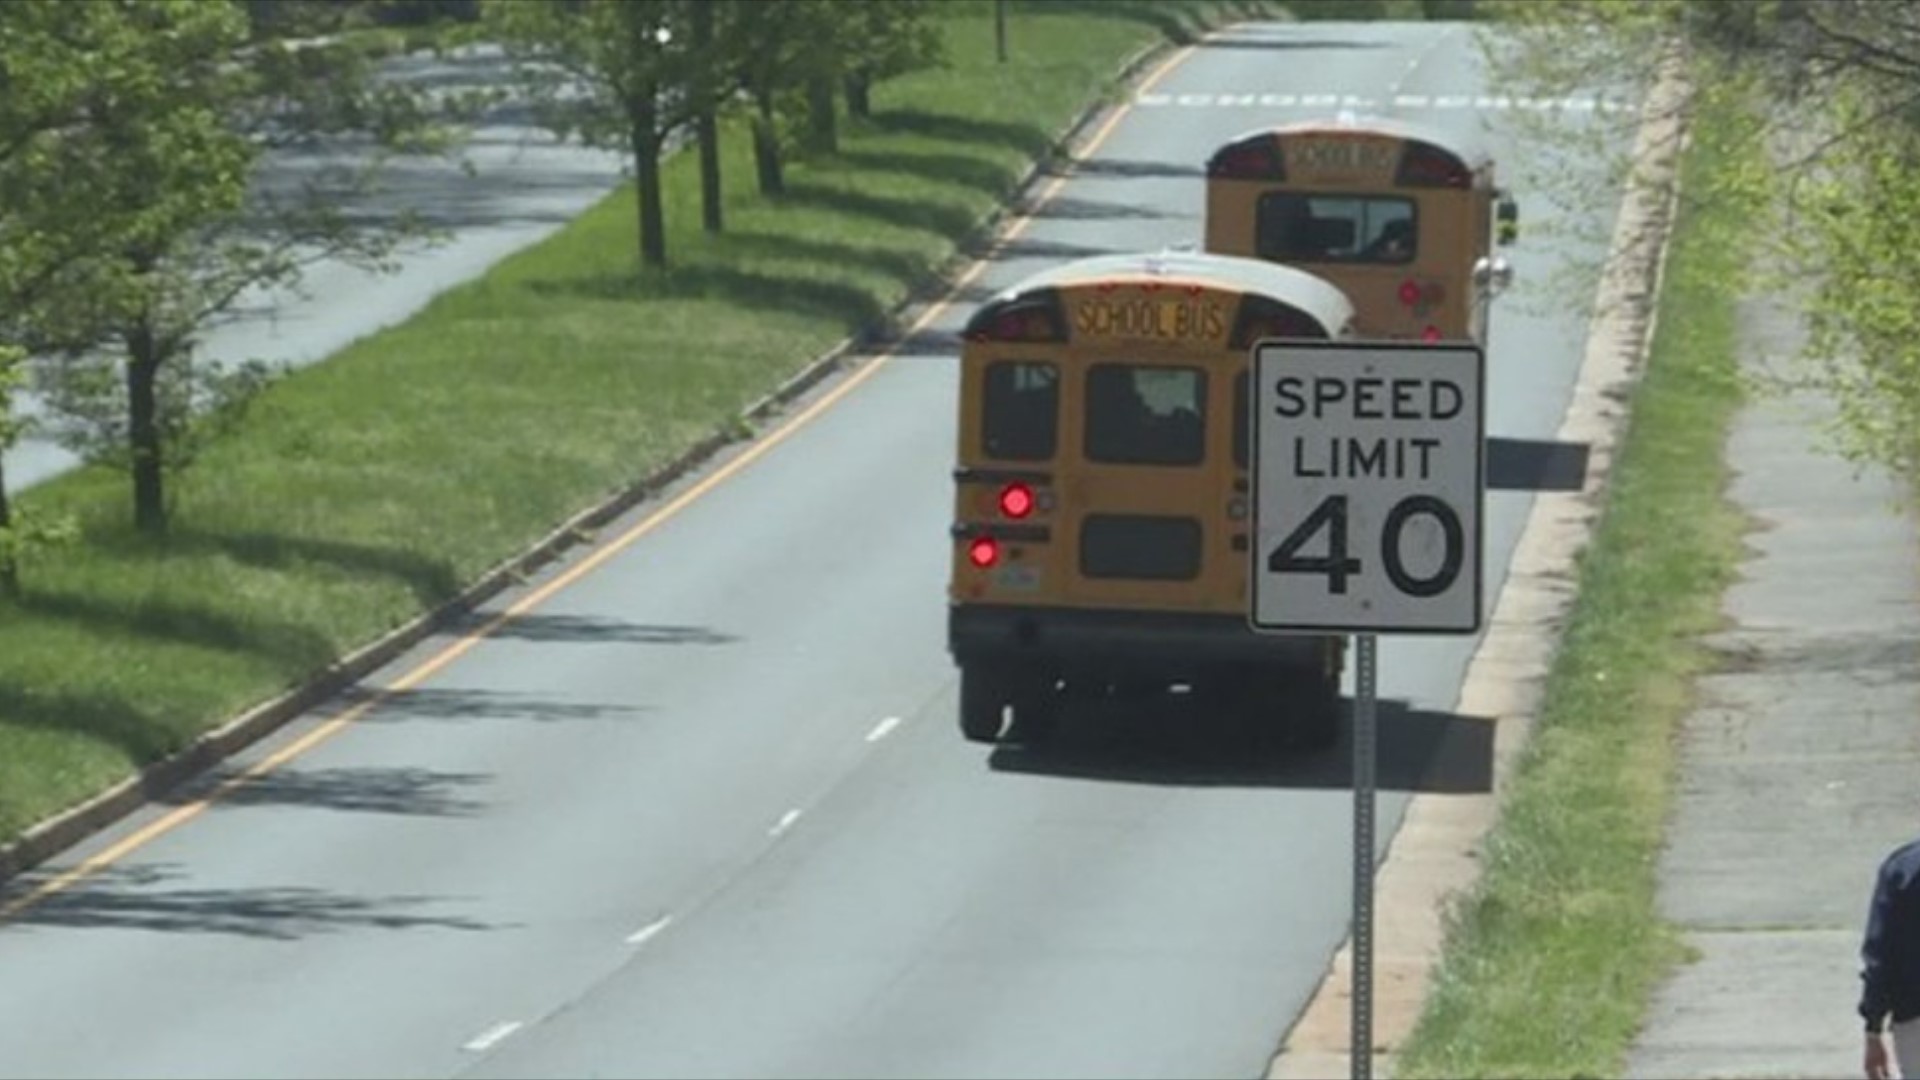 A Fairfax County school board member explains why it's hard to lower speed limits in a school zone because of VDOT.